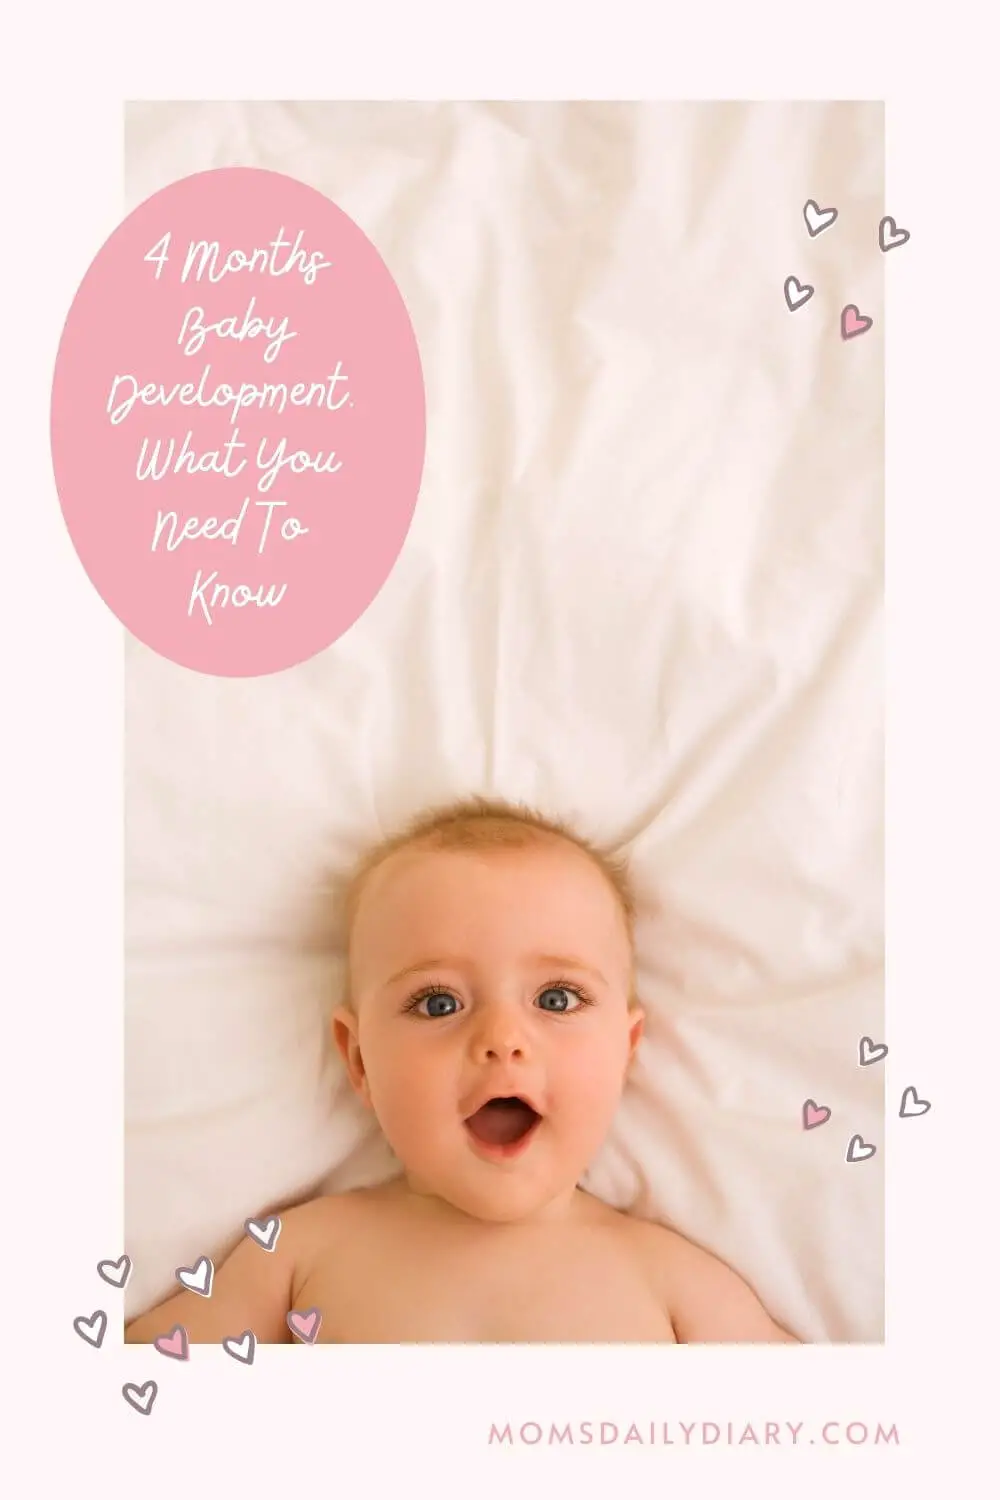 As part of their 4 months baby development your baby will start revealing their personality. Check out what else is new (and there's plenty)!